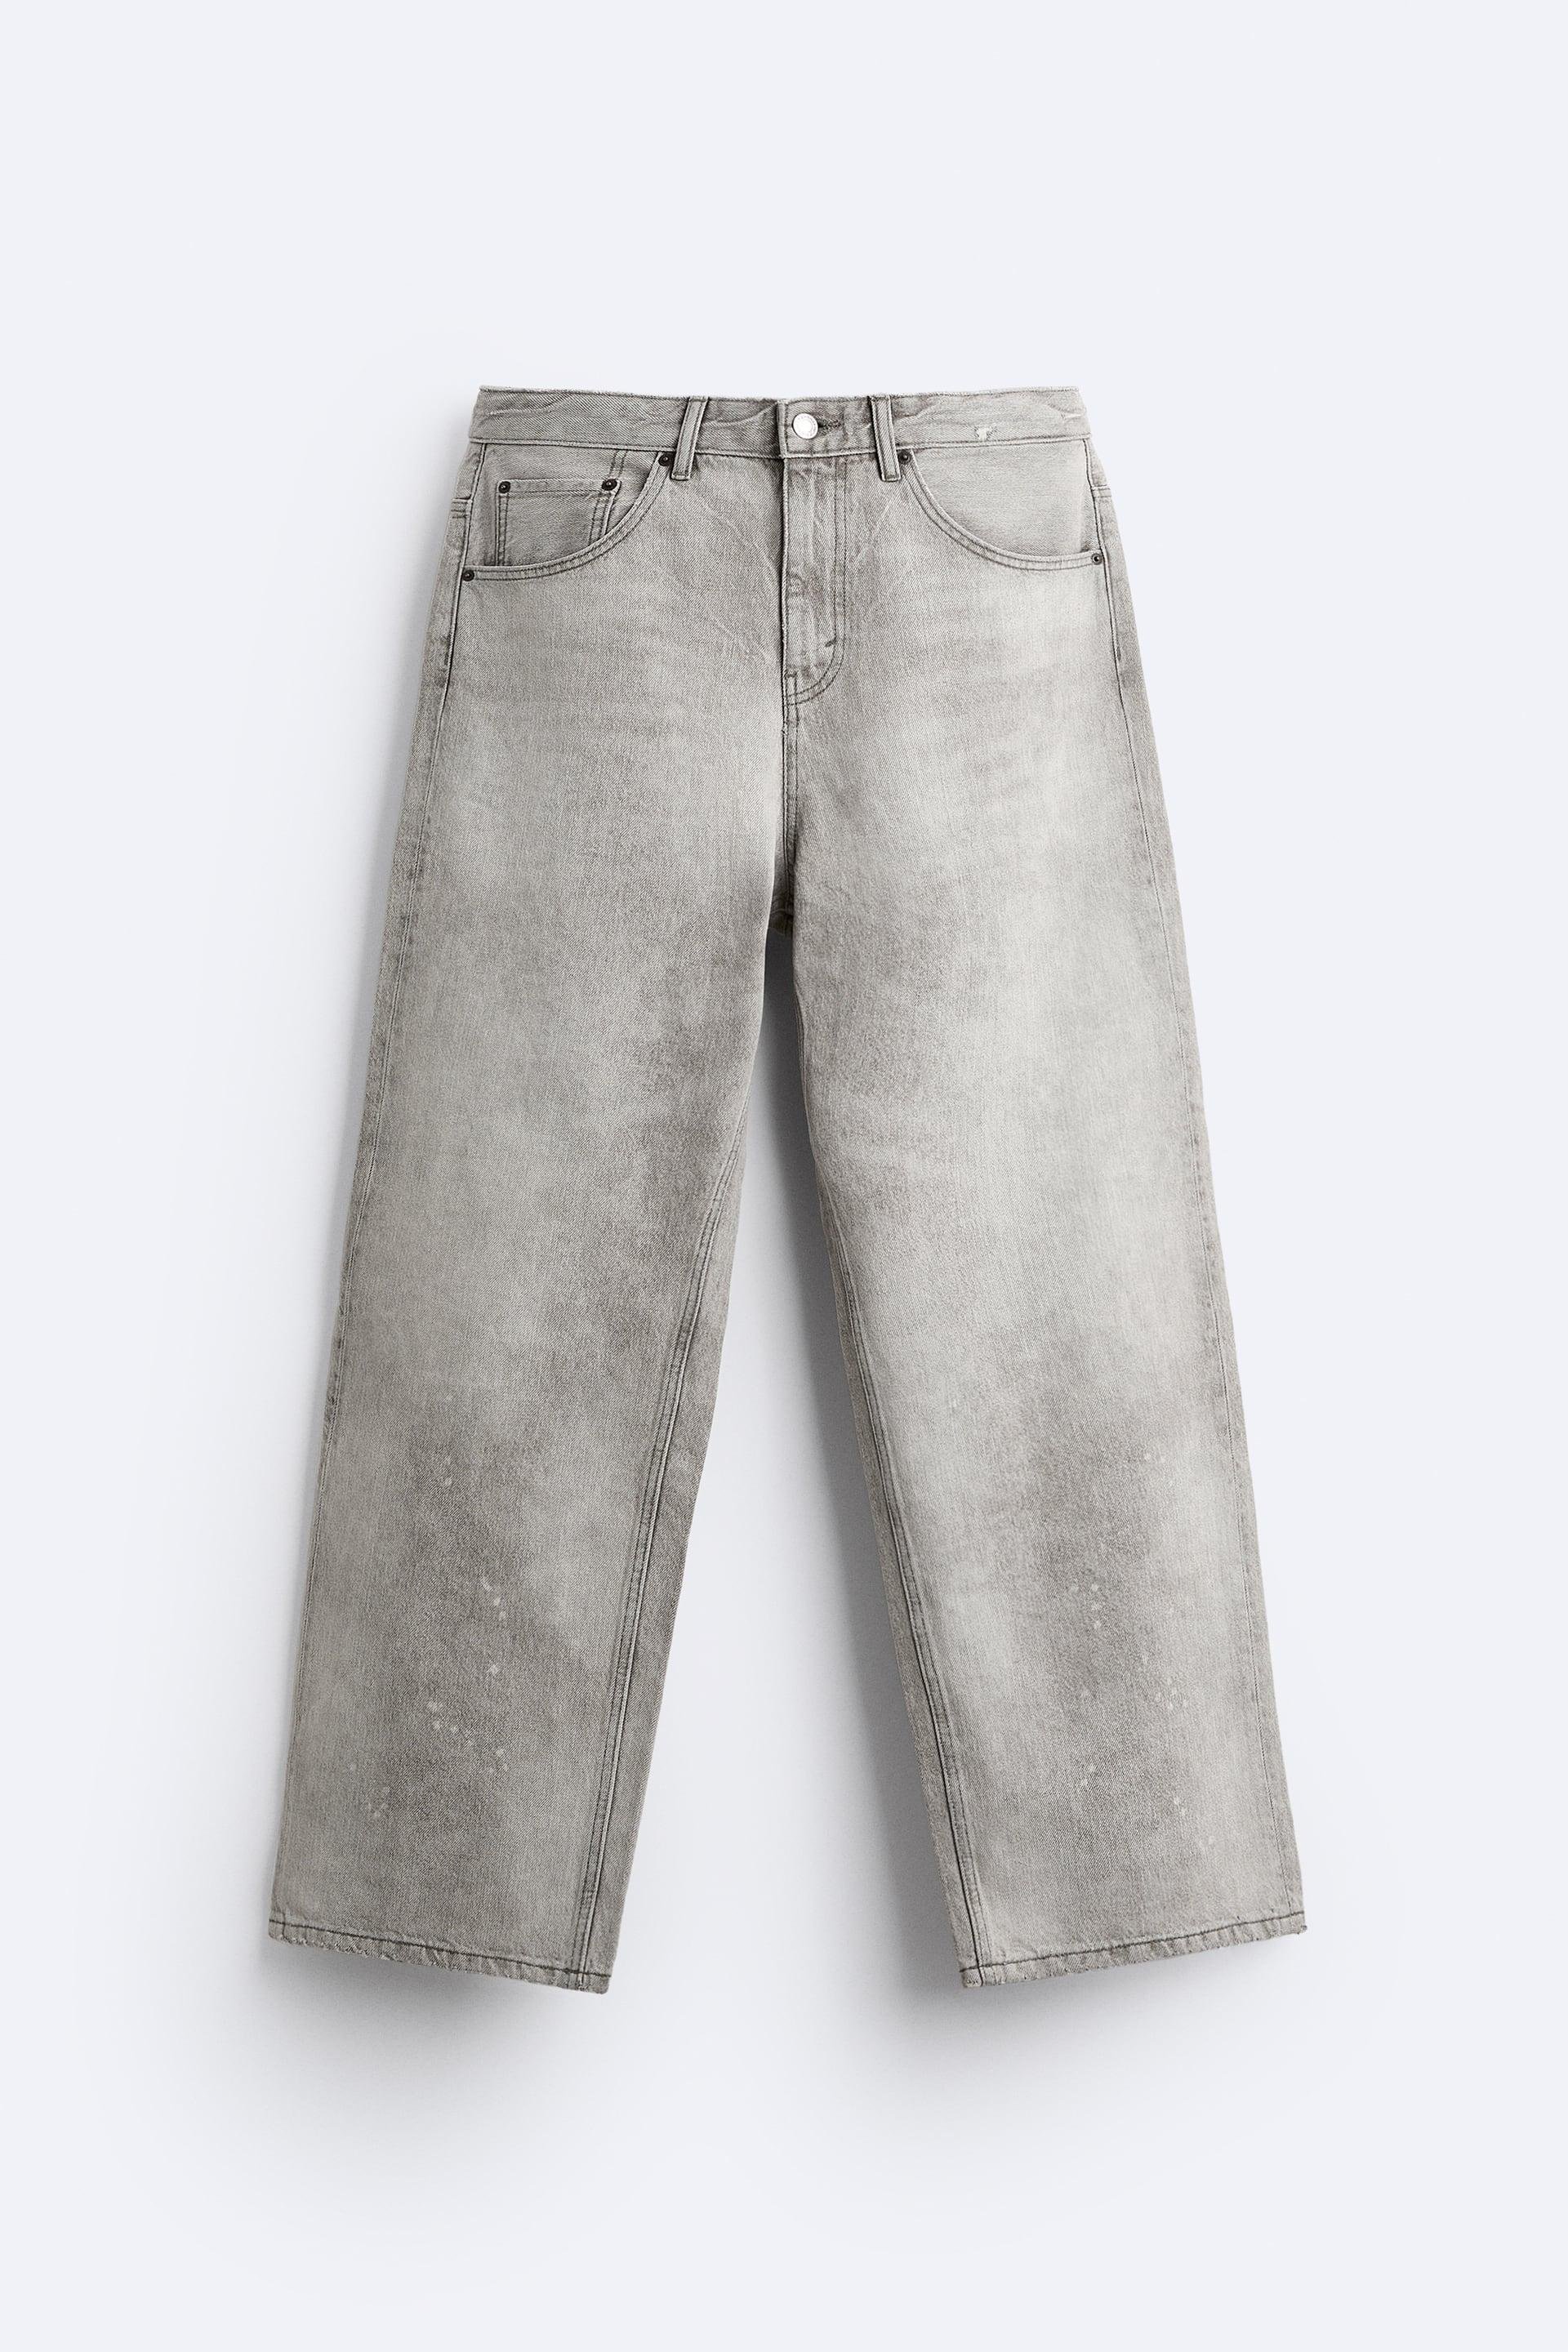 BAGGY FIT JEANS by ZARA